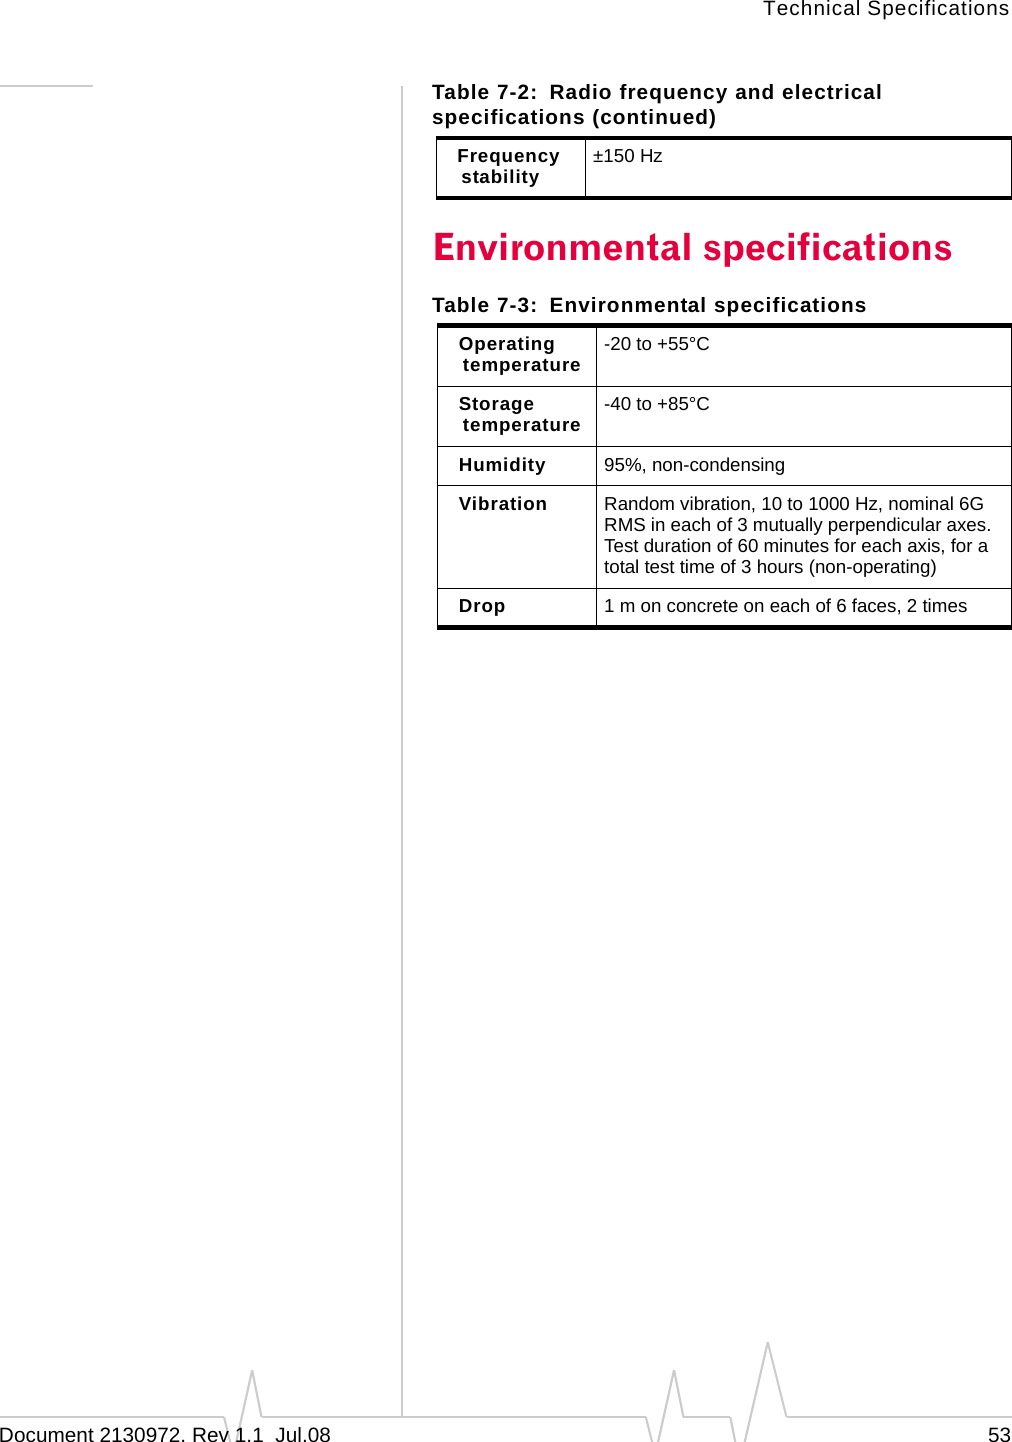 Technical SpecificationsDocument 2130972. Rev 1.1  Jul.08 53Environmental specificationsFrequency stability ±150 HzTable 7-3: Environmental specificationsOperating temperature -20 to +55°CStorage temperature -40 to +85°C Humidity 95%, non-condensingVibration Random vibration, 10 to 1000 Hz, nominal 6G RMS in each of 3 mutually perpendicular axes. Test duration of 60 minutes for each axis, for a total test time of 3 hours (non-operating)Drop 1 m on concrete on each of 6 faces, 2 timesTable 7-2: Radio frequency and electrical specifications (continued)